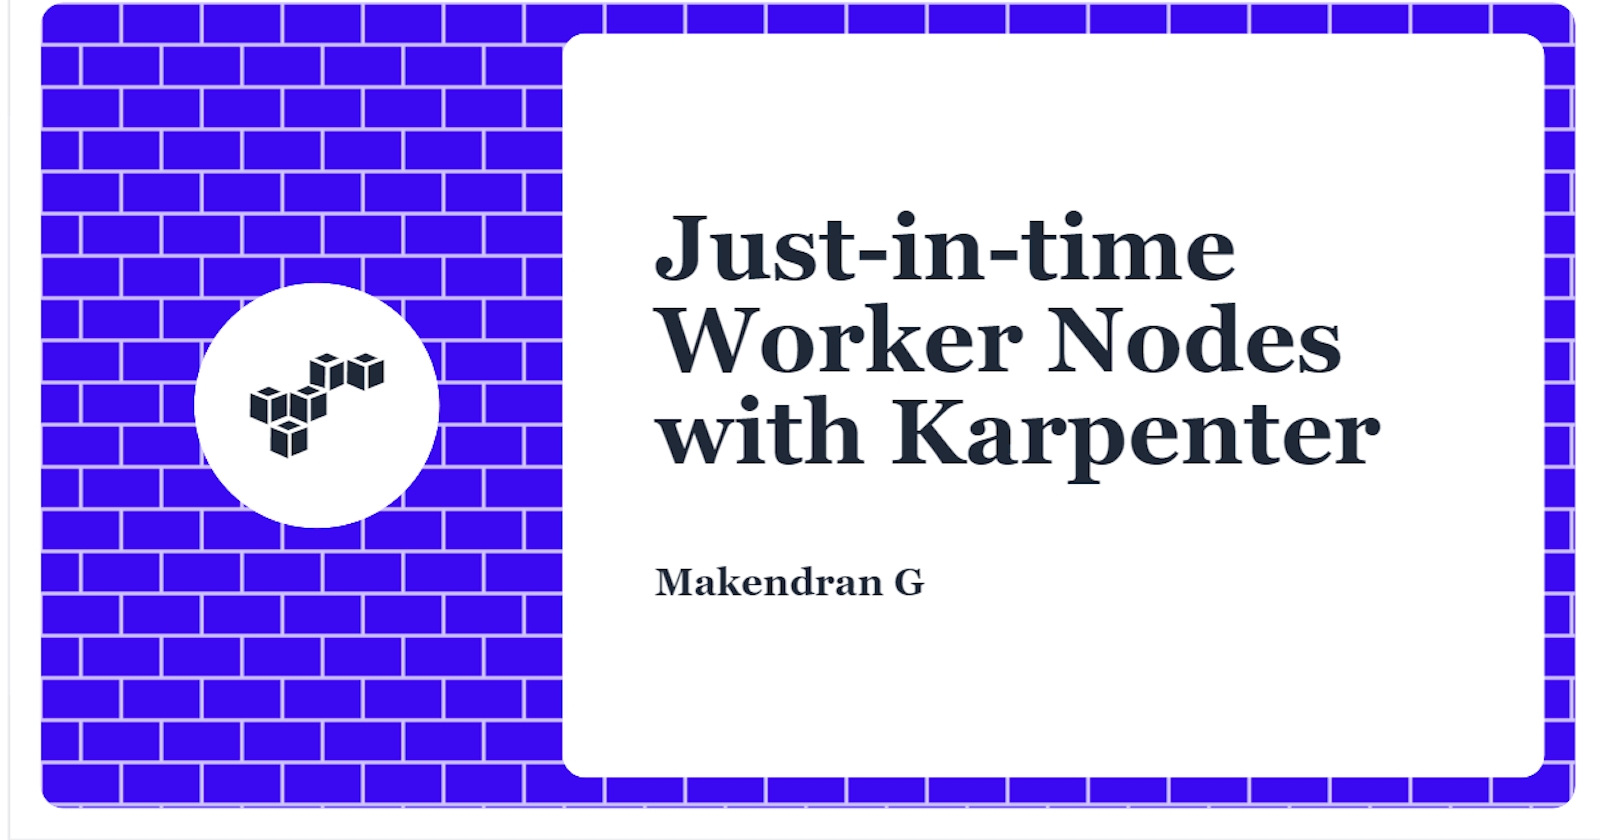 Just-in-time Worker Nodes with Karpenter